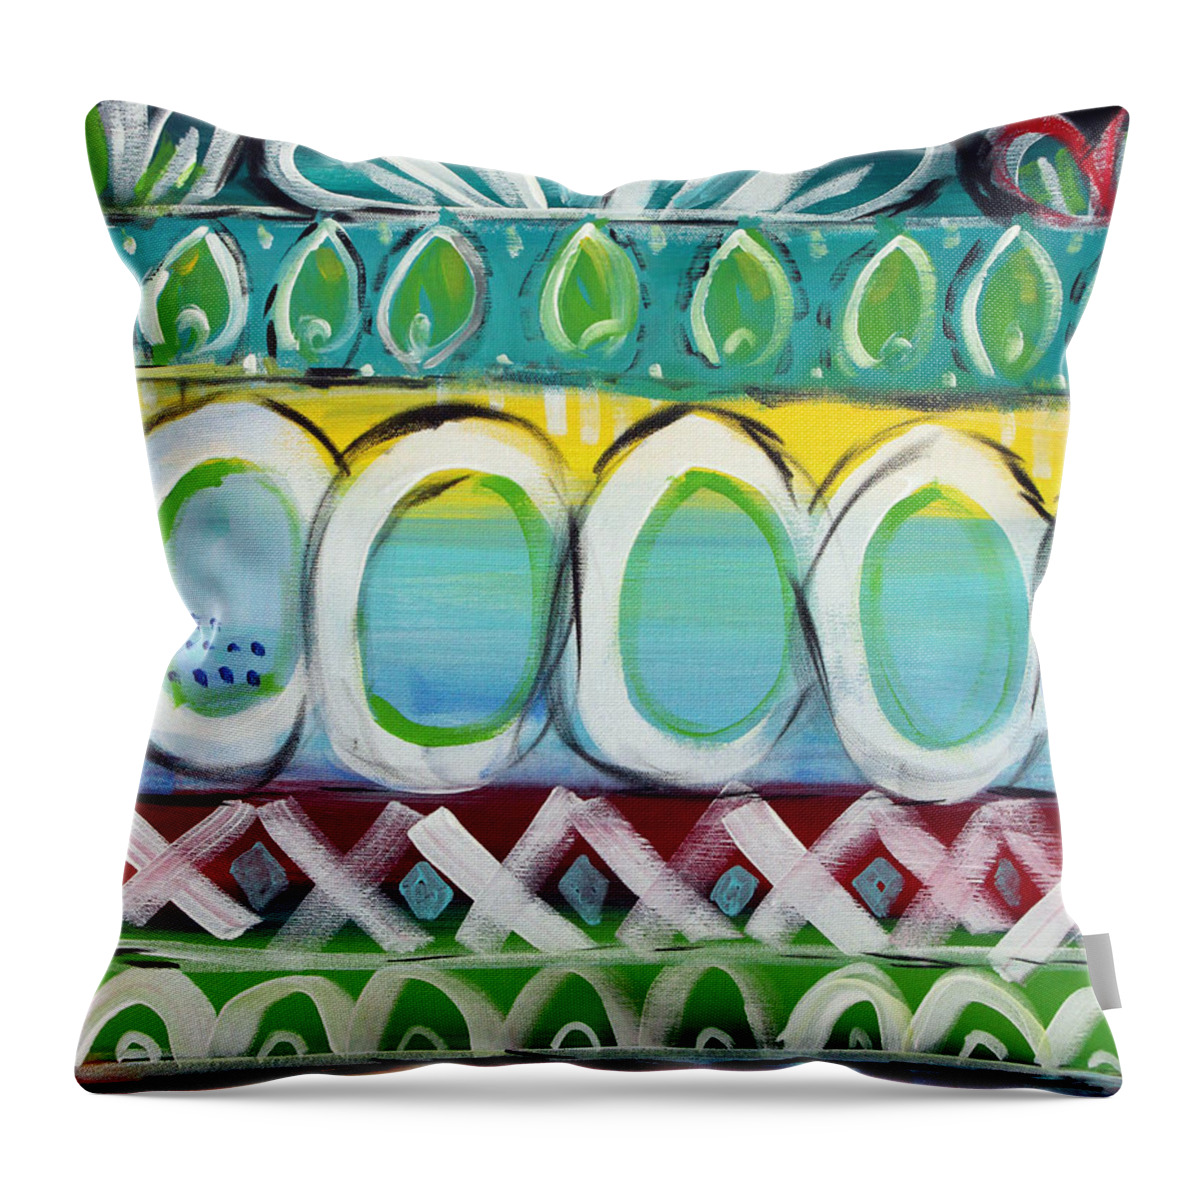 Bold Colors Throw Pillow featuring the painting Fiesta - Colorful Painting by Linda Woods